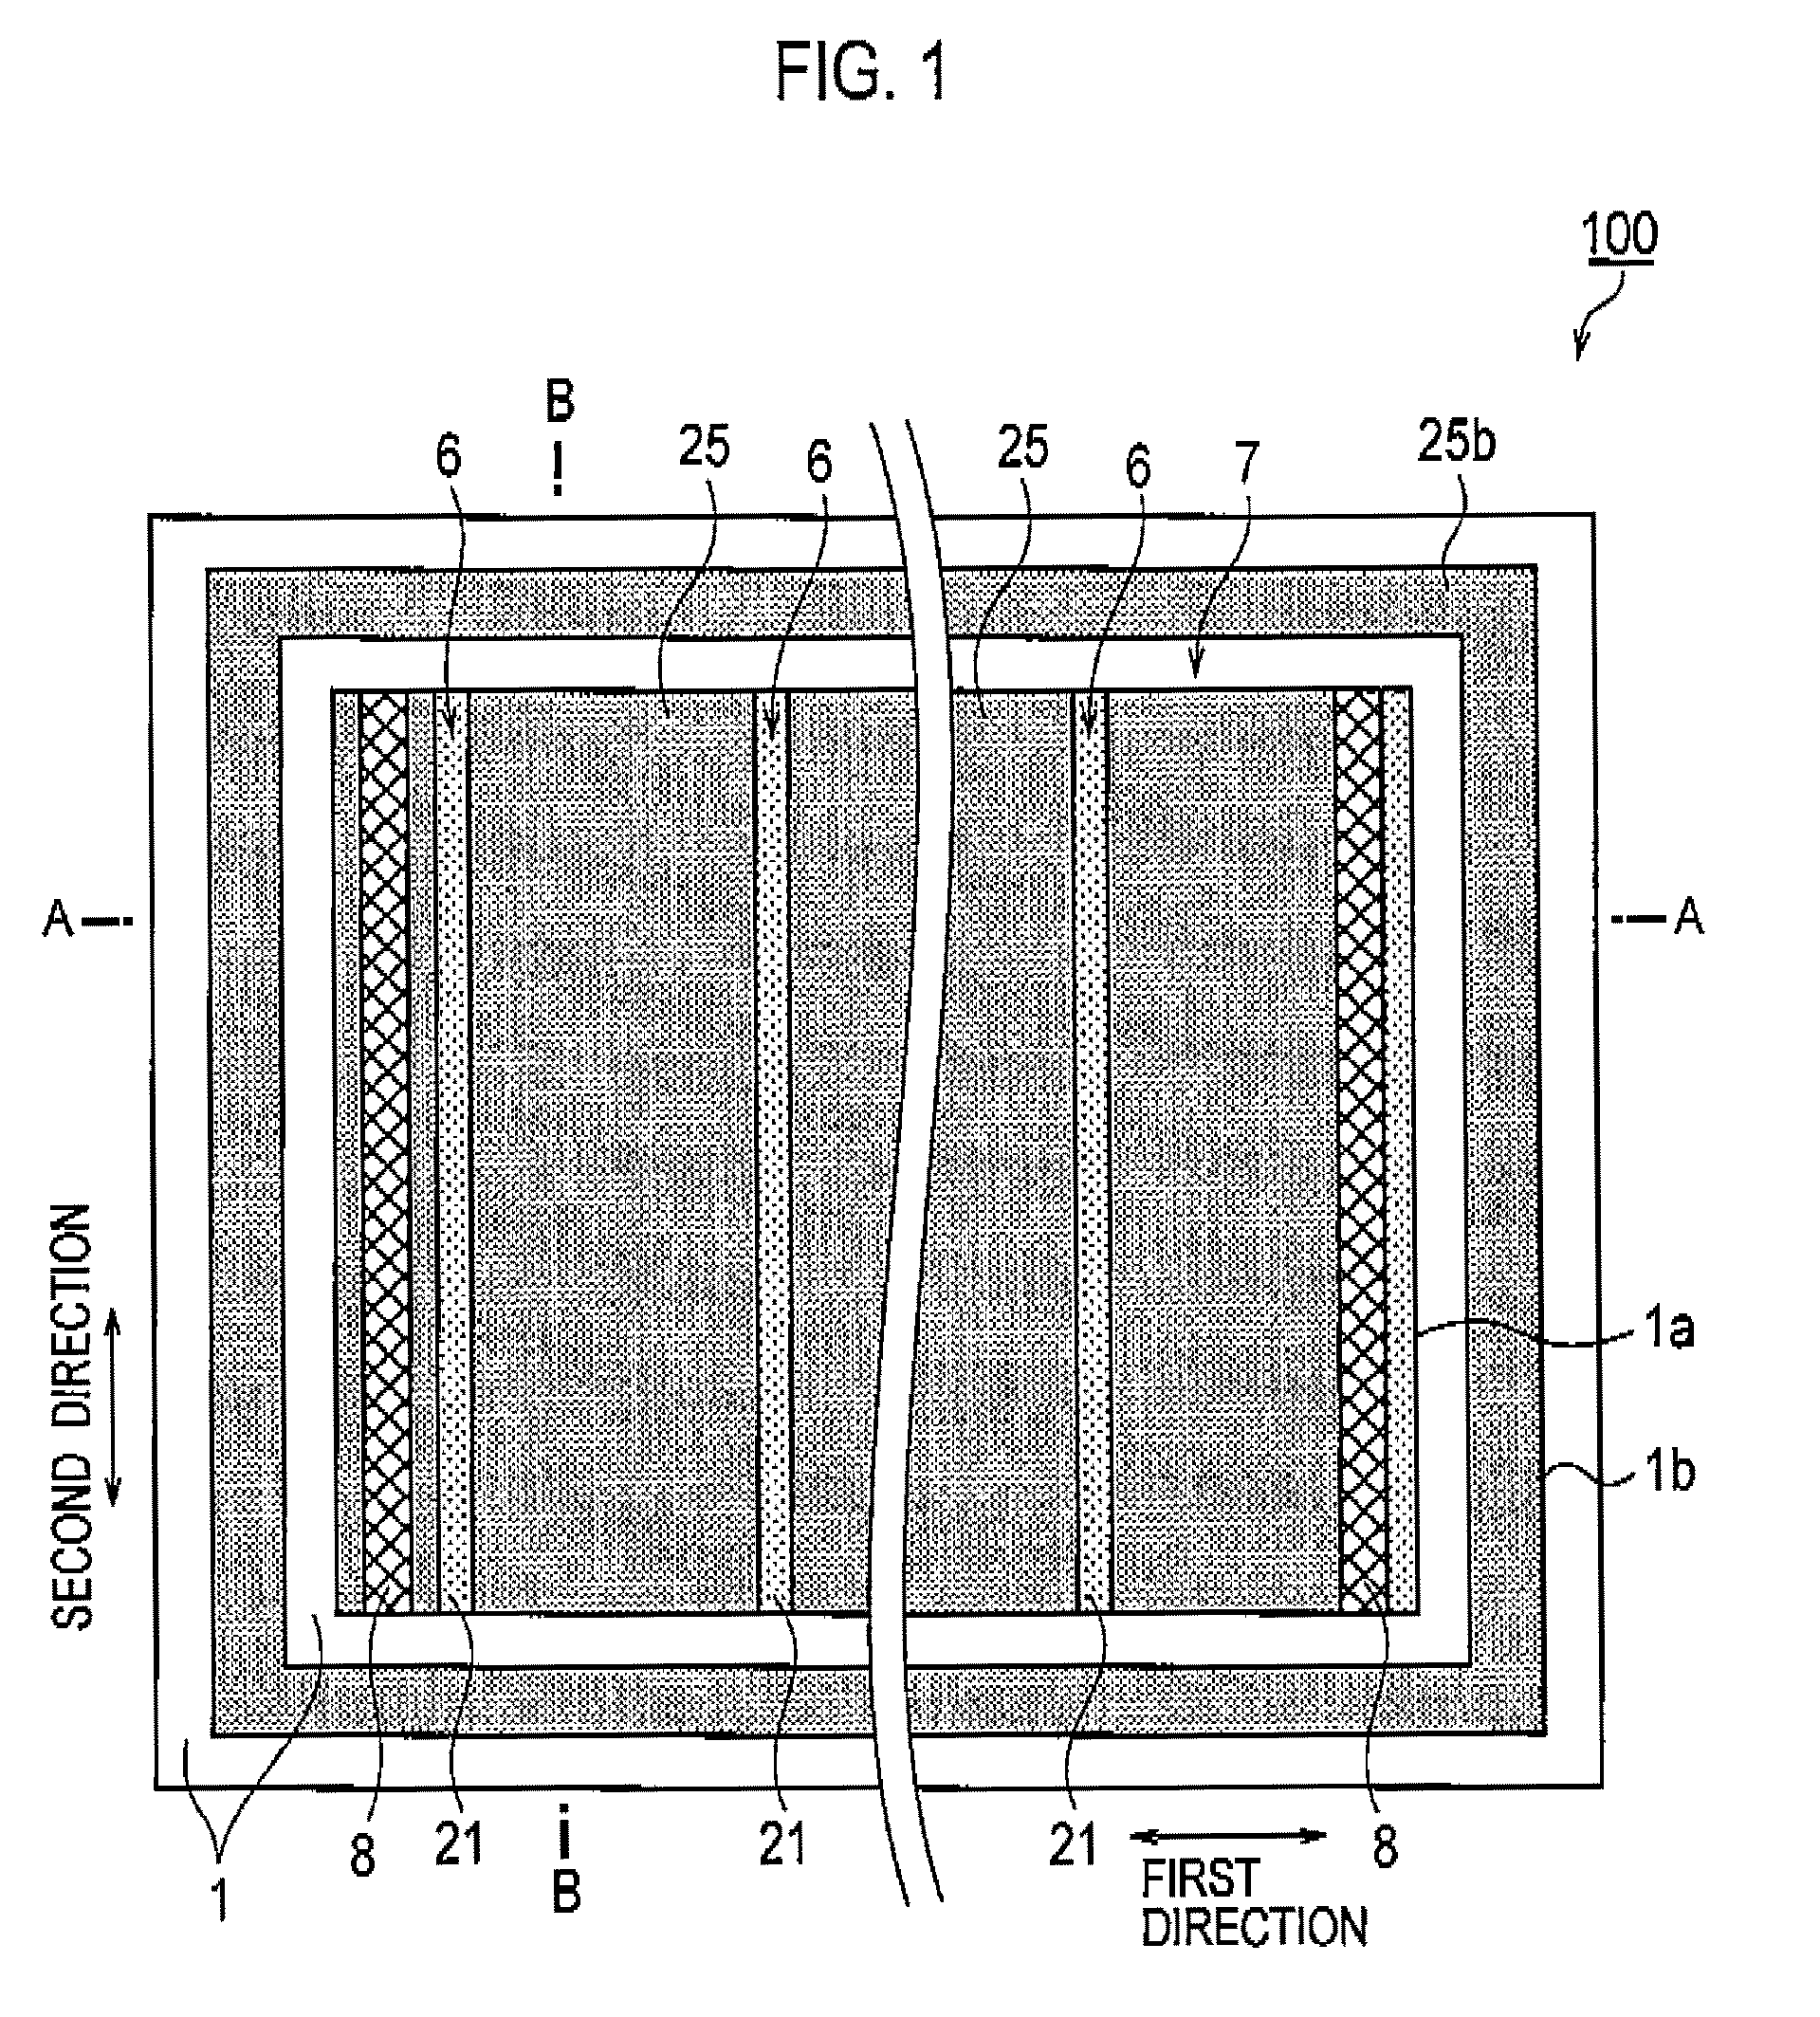 Solar cell module and method for manufacturing solar cell module